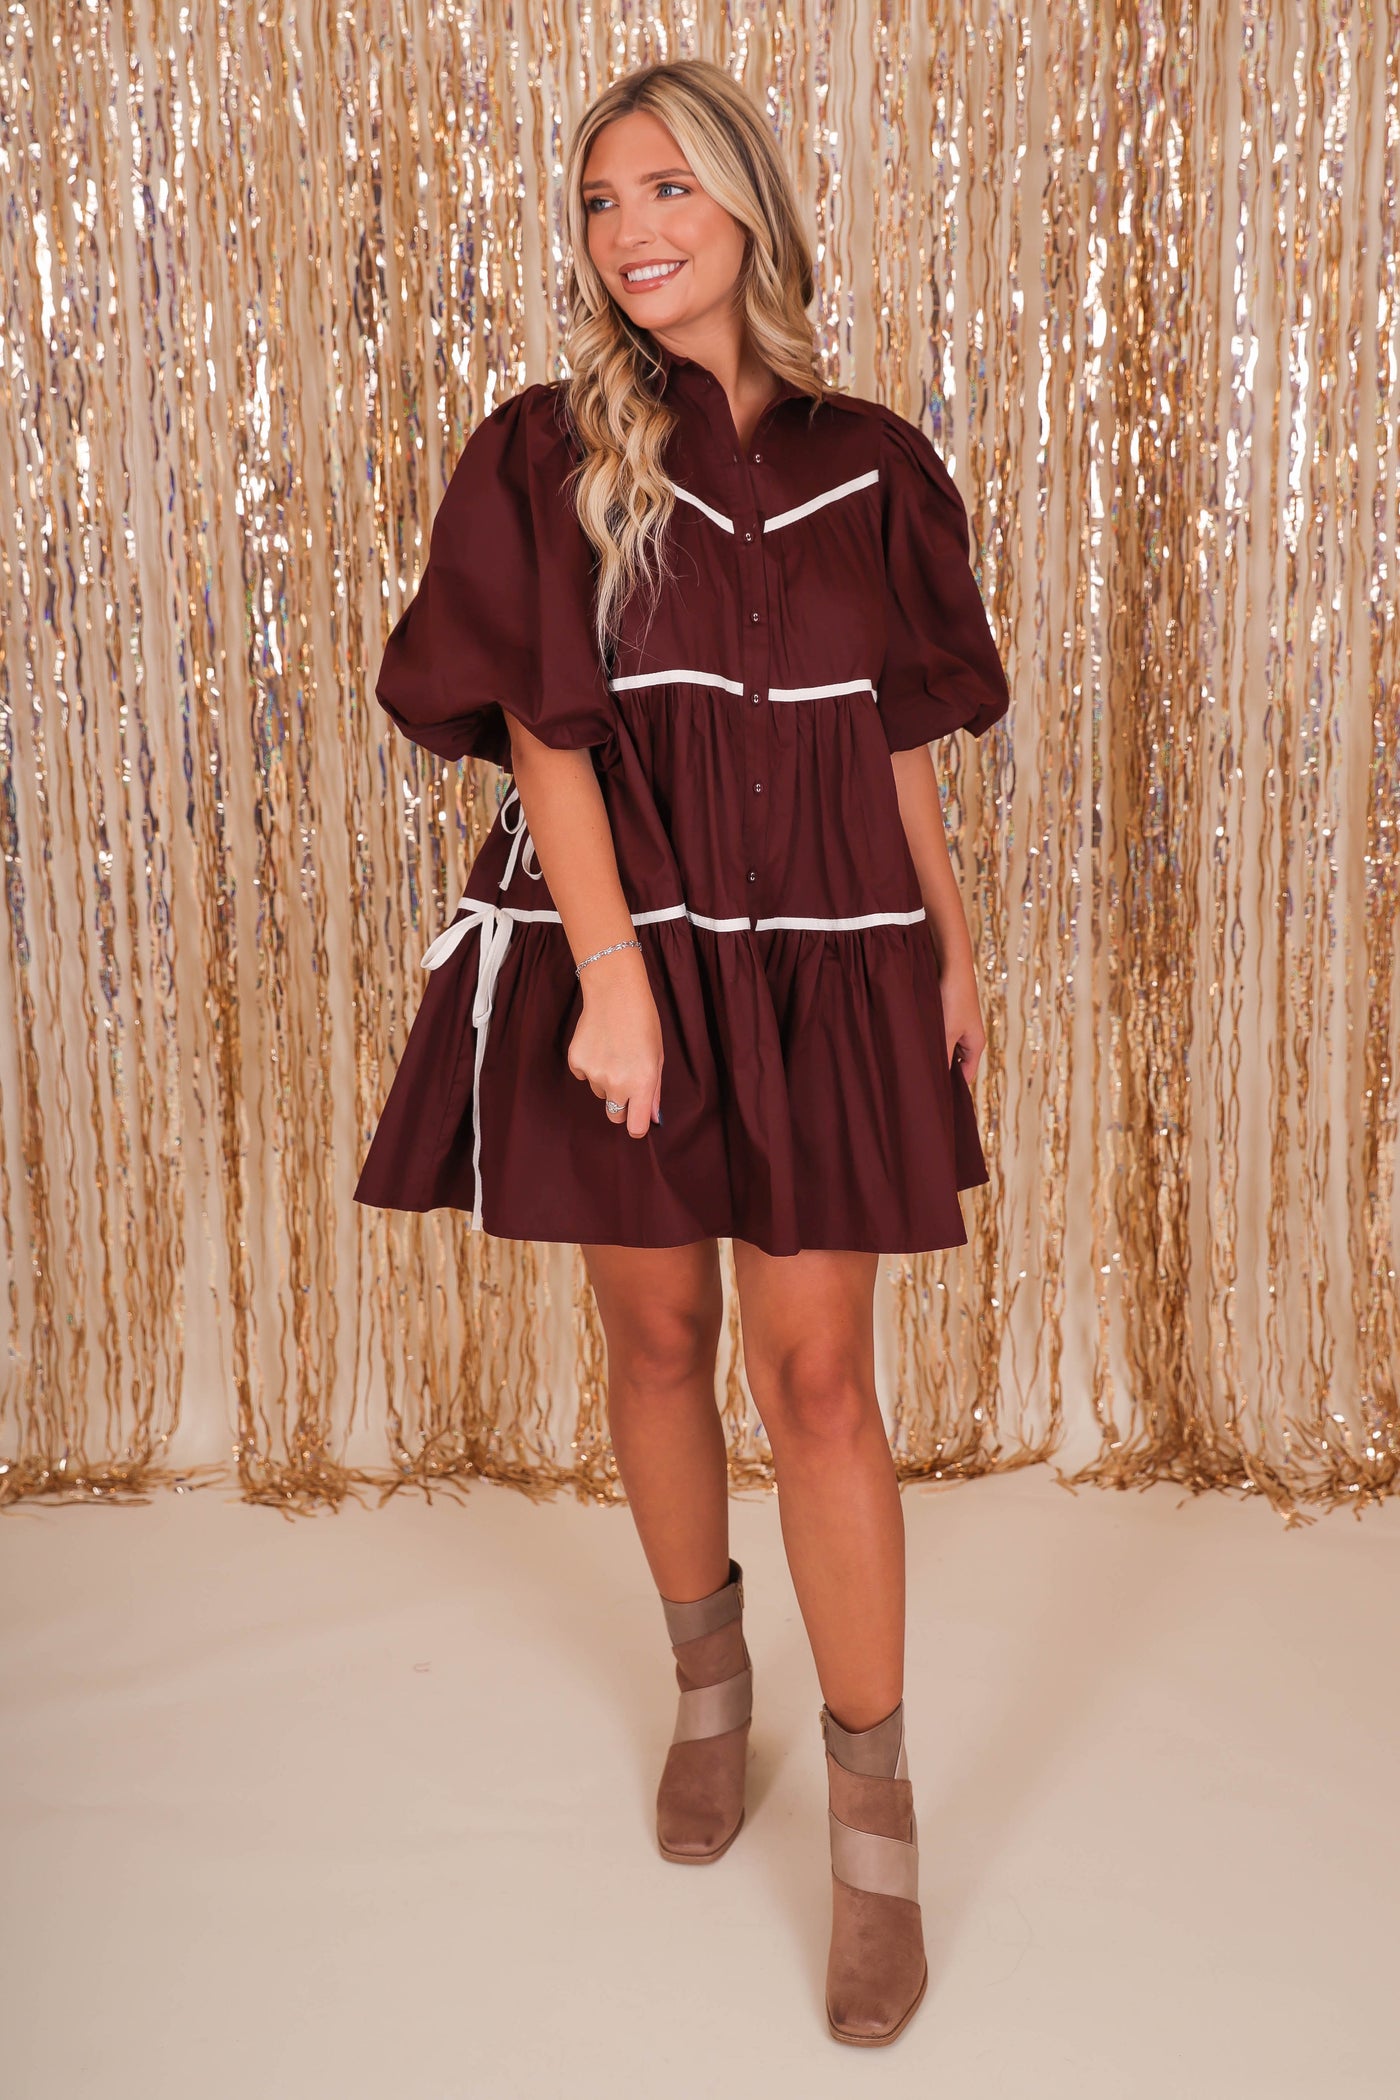 Women's Maroon Button Down Dress- Chic High End Dress with Bubble Sleeves- Sofie The Label Dress